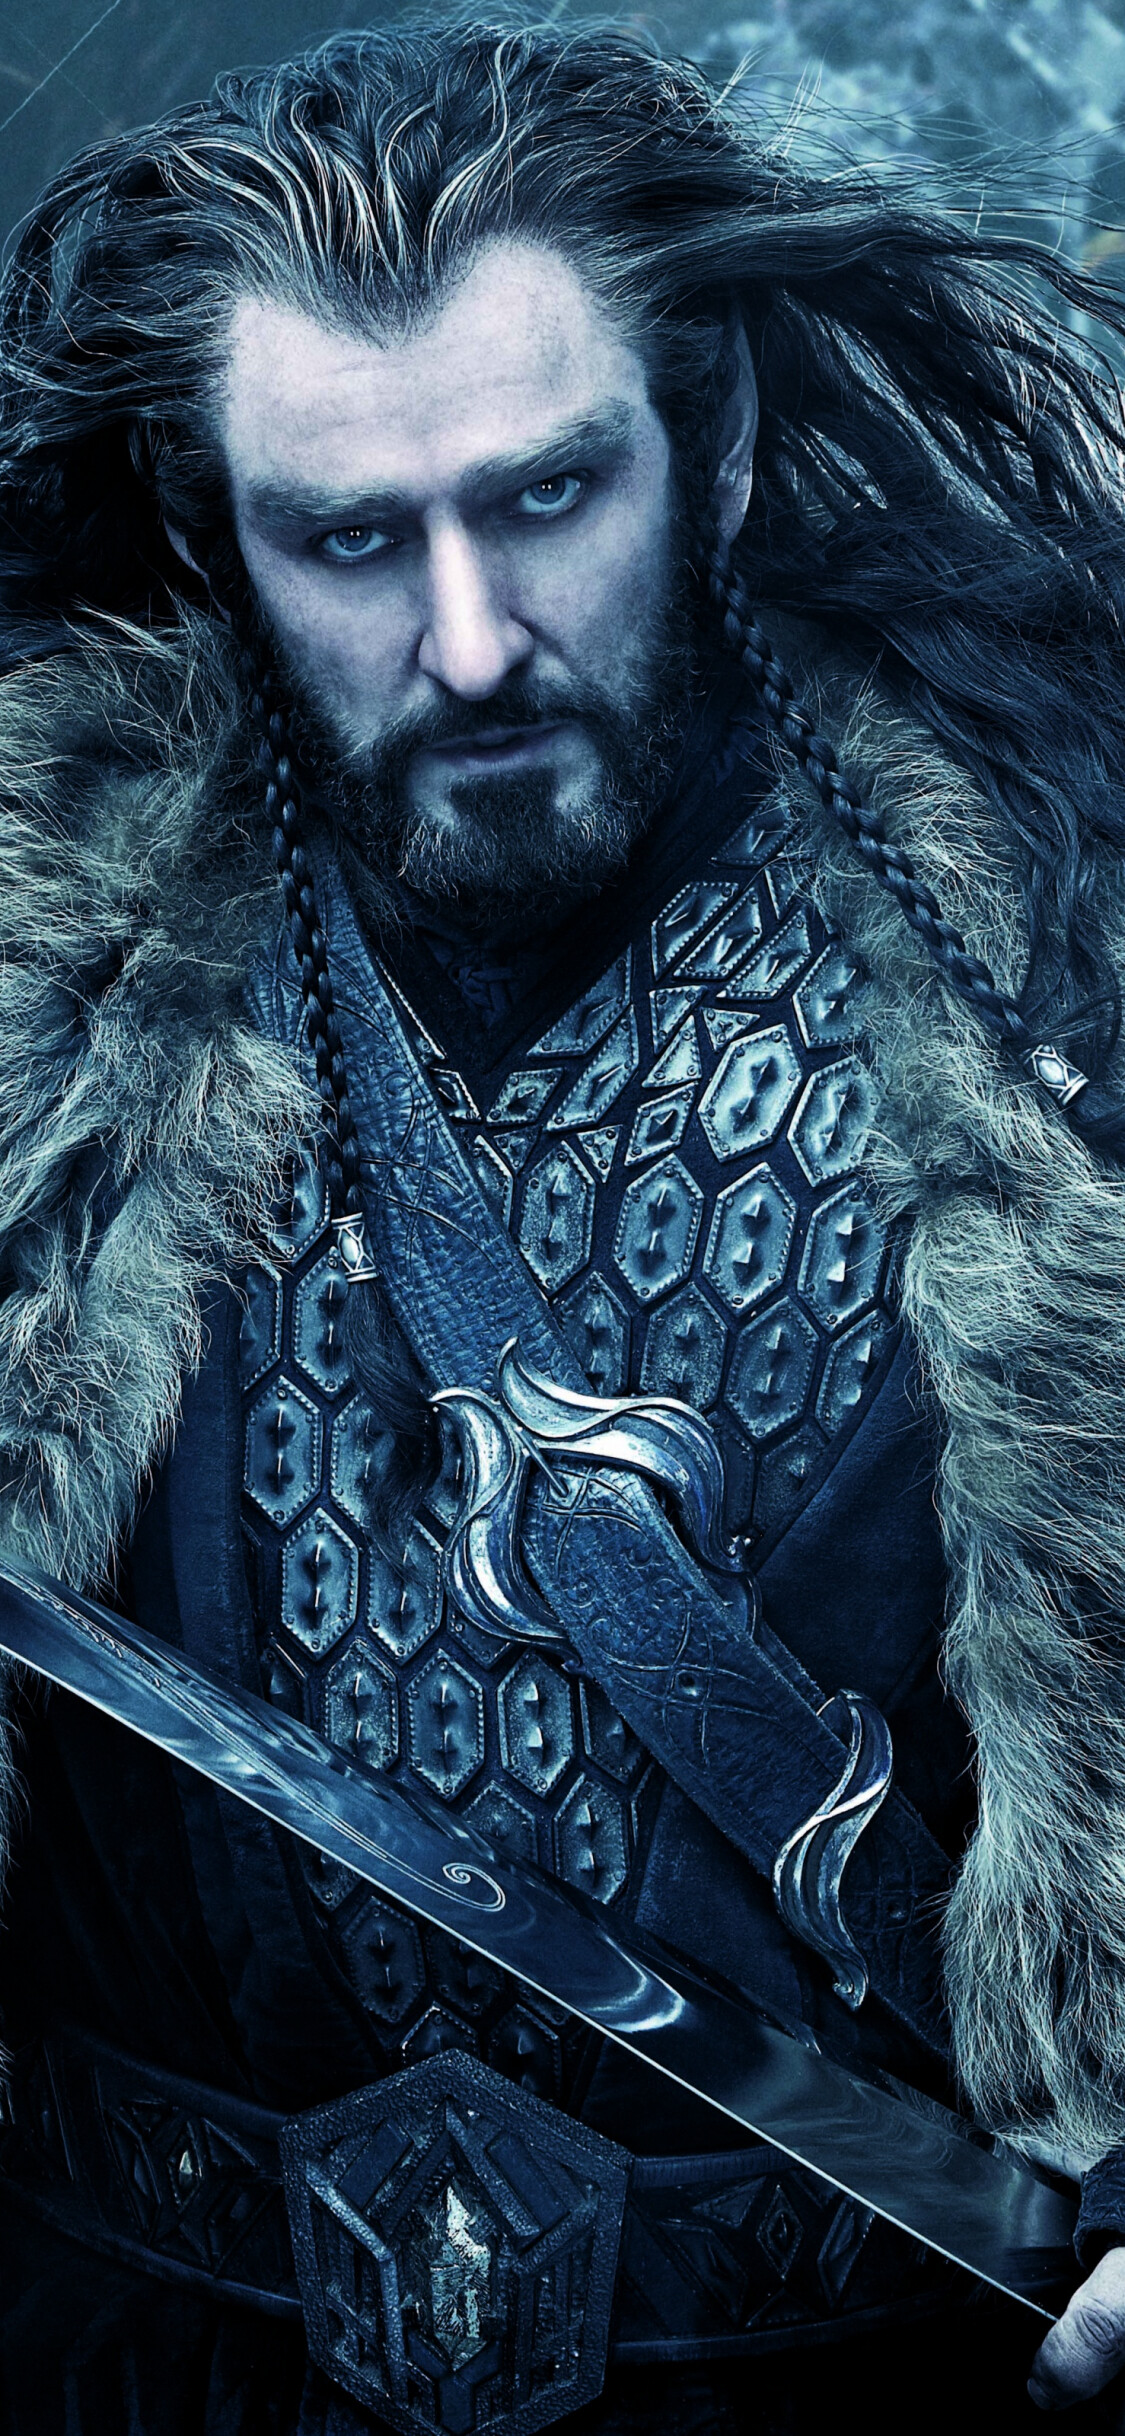 The Hobbit: Thorin Oakenshield, The leader of the Company of Dwarves. 1130x2440 HD Wallpaper.